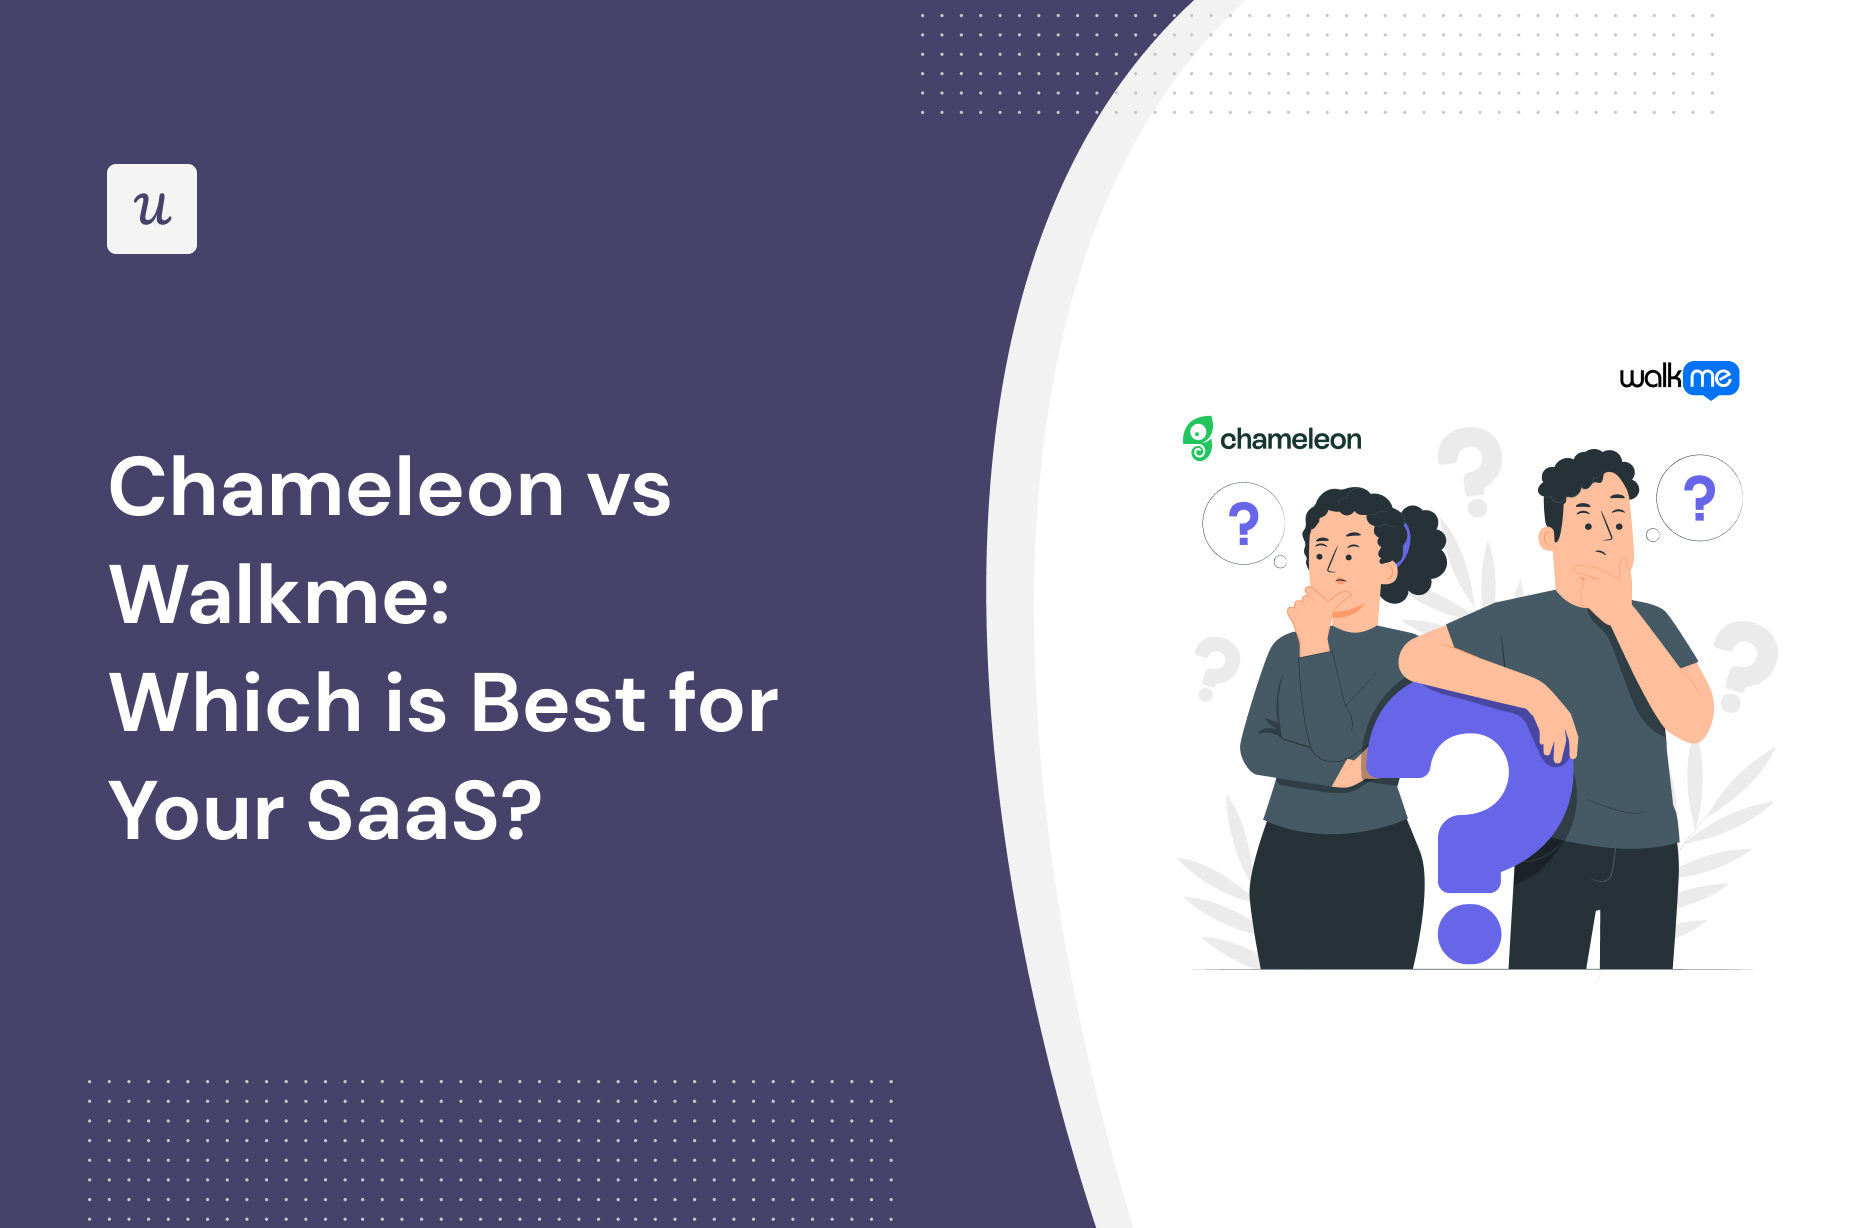 Chameleon vs Walkme: Which Is Best for Your SaaS?